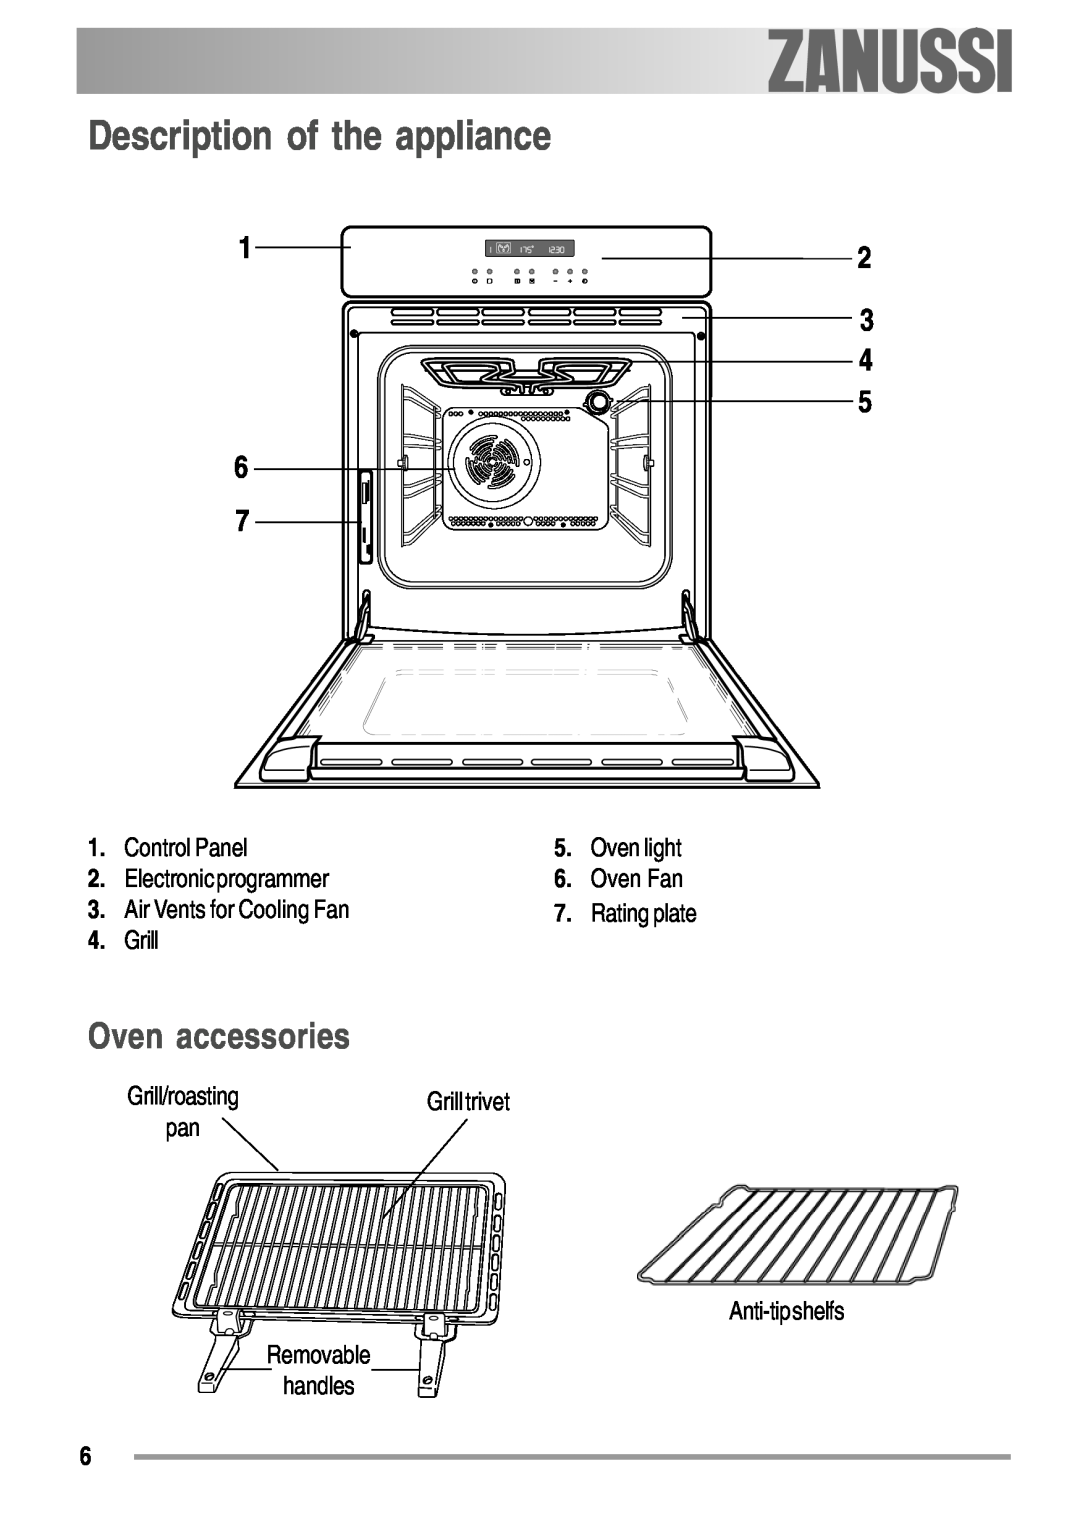 Zanussi ZYB 594 manual Description of the appliance, electrolux, Control Panel, Electronic programmer, Oven Fan, Grill 